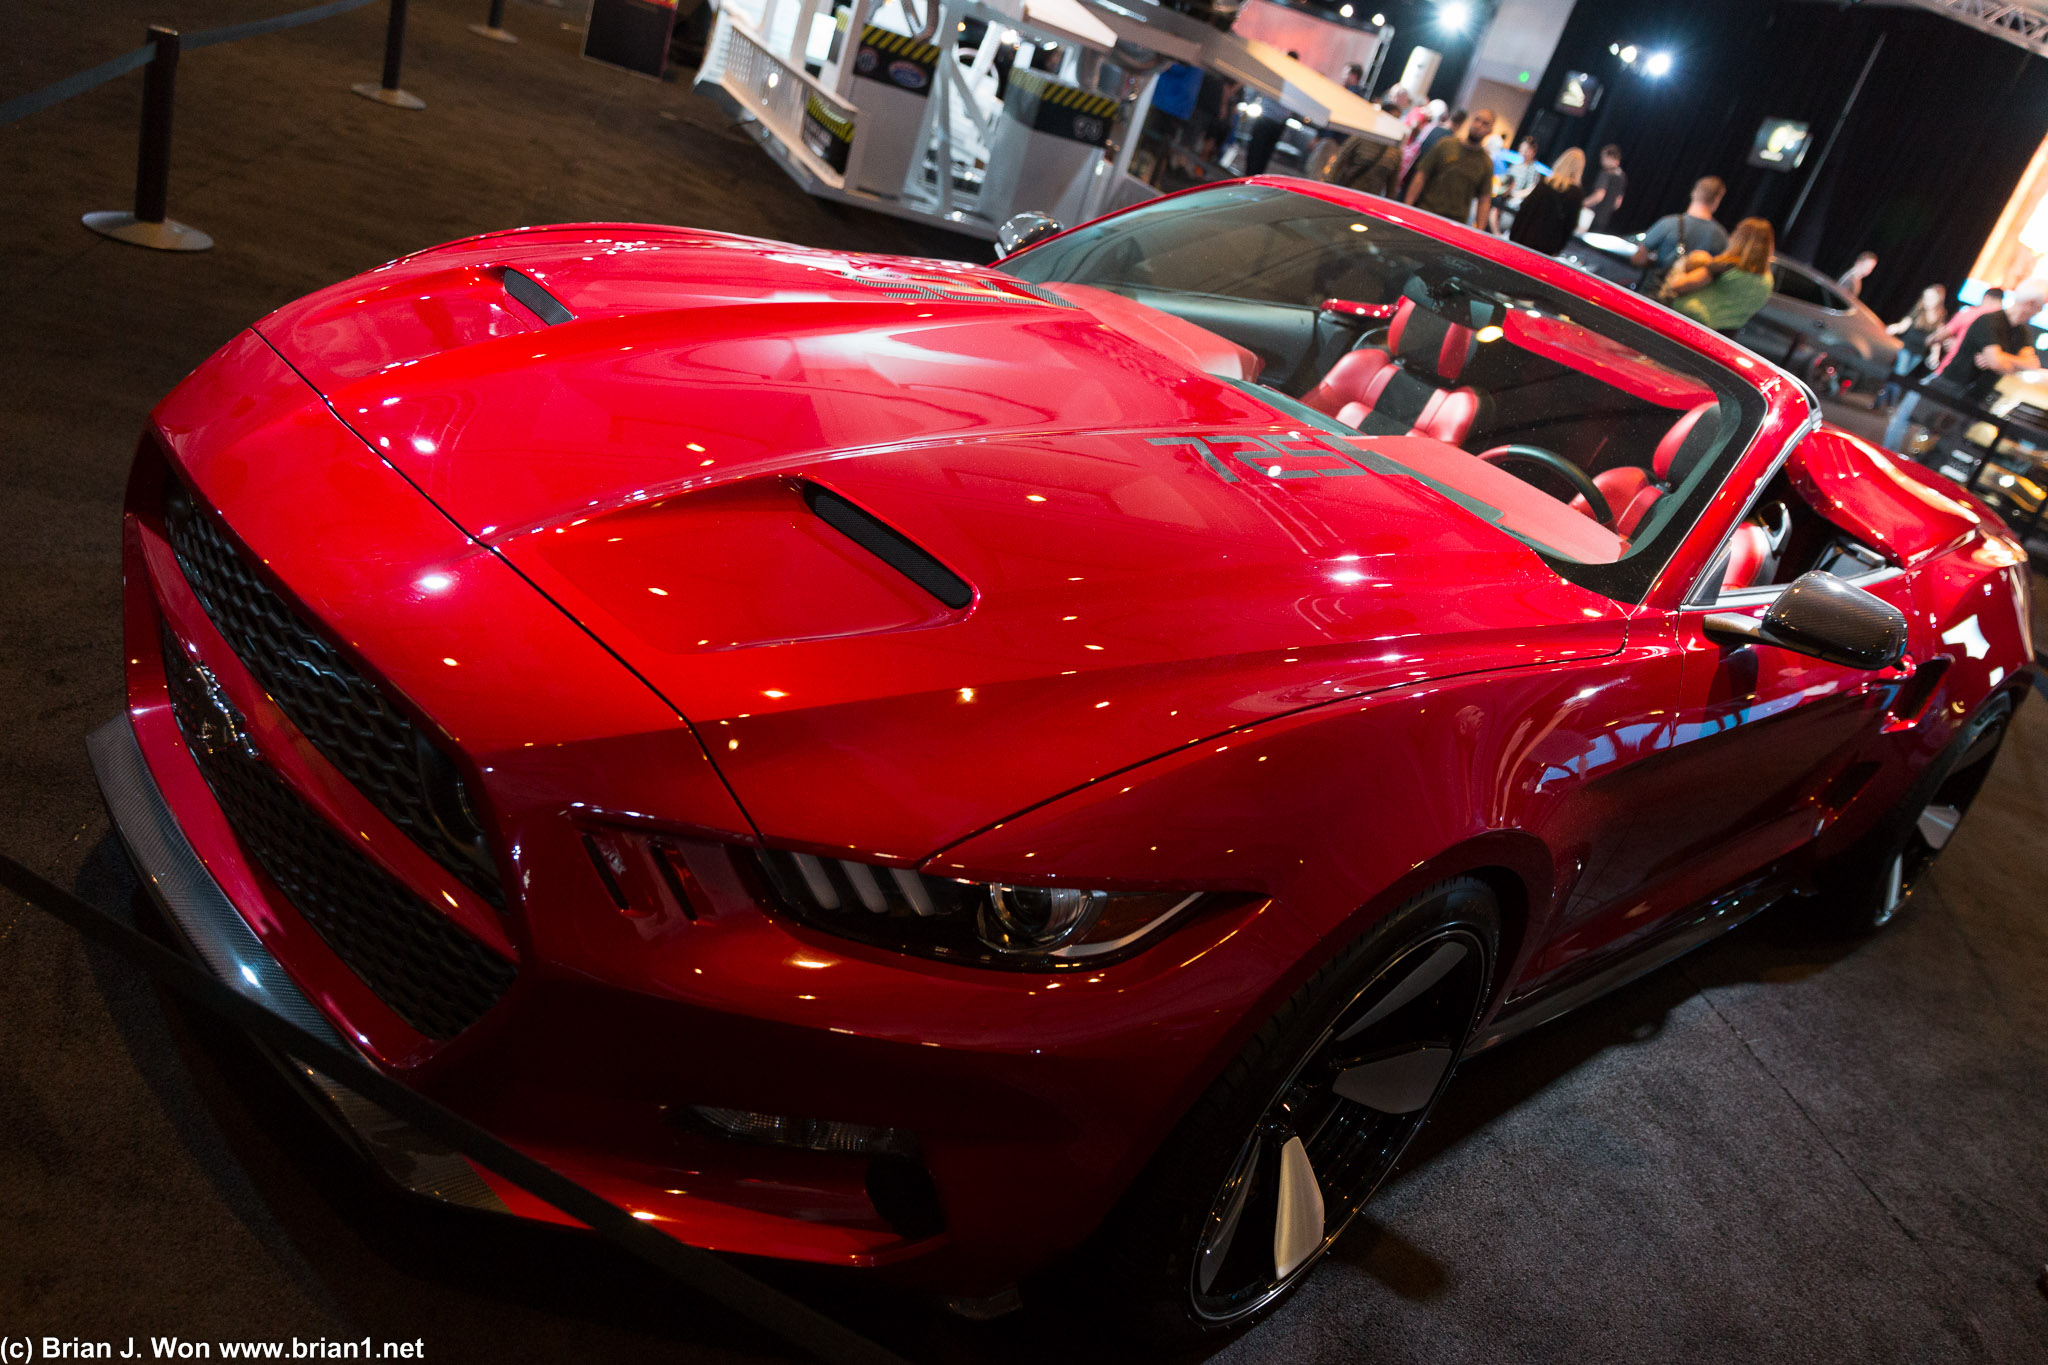 Ford Mustang modified by Galpin Auto Sports.